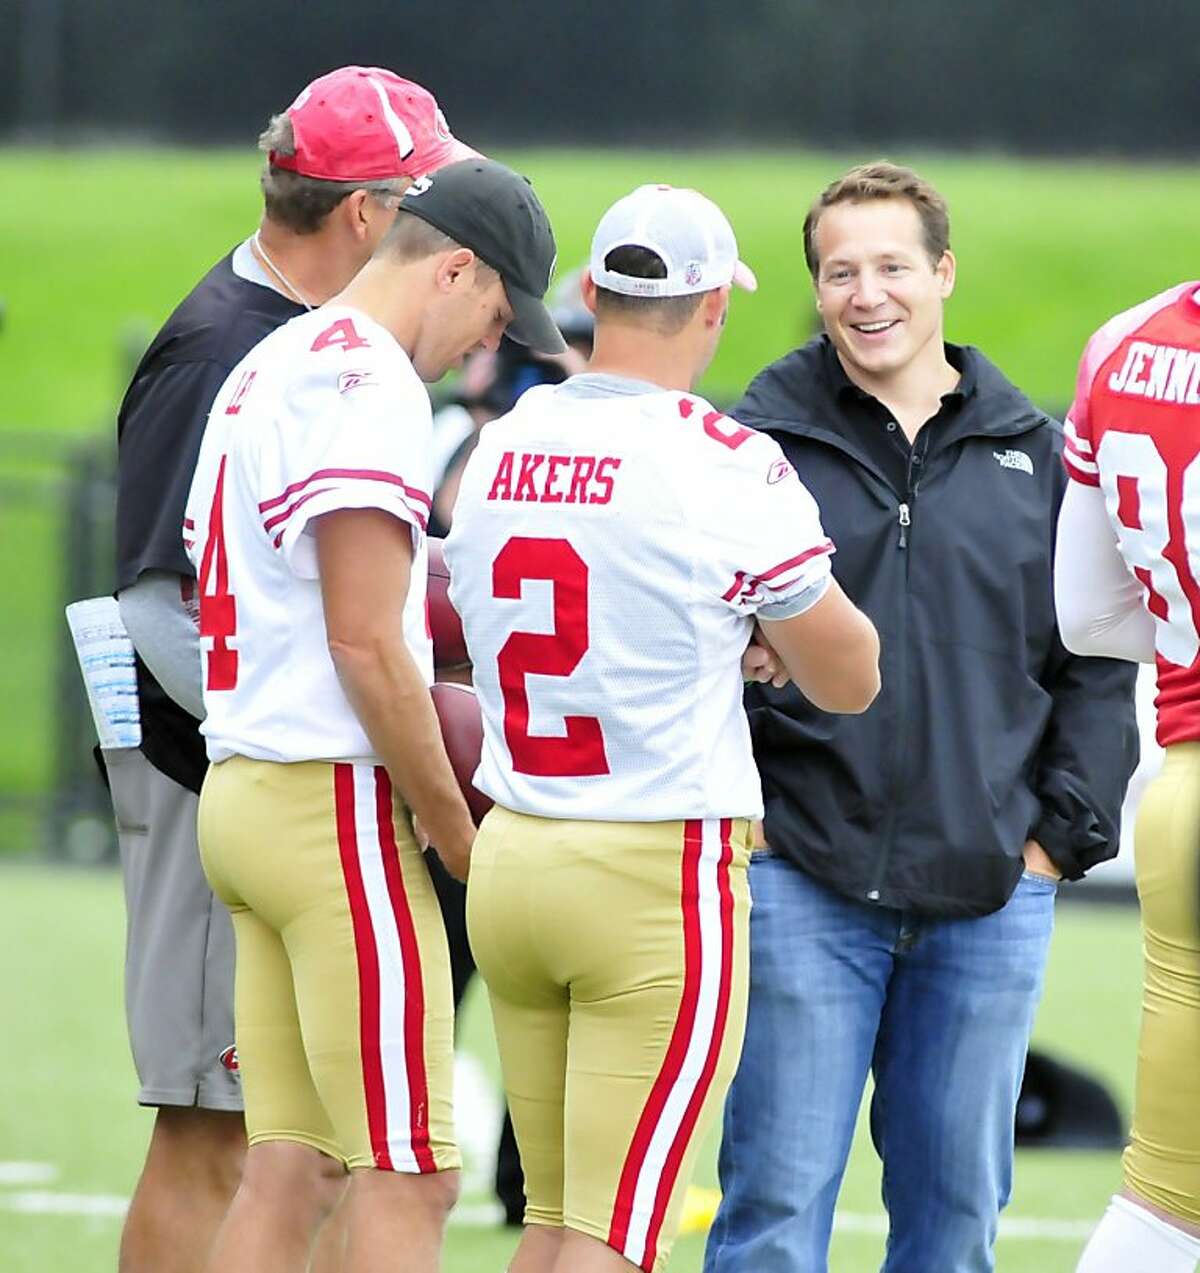 YOUNGSTOWN, OHIO - SEPTEMBER 29, 2011: Former head coach Eric Mangini of the New York Jets and Cleveland Browns smiles while talking with kicker David Akers #2 and punter Andy Lee #4 of the San Francisco 49ers during practice at Stambaugh Stadium at Youngstown State University in Youngstown, Ohio on September 29, 2011. (Photo by David Dermer/Diamond Images/Getty Images)